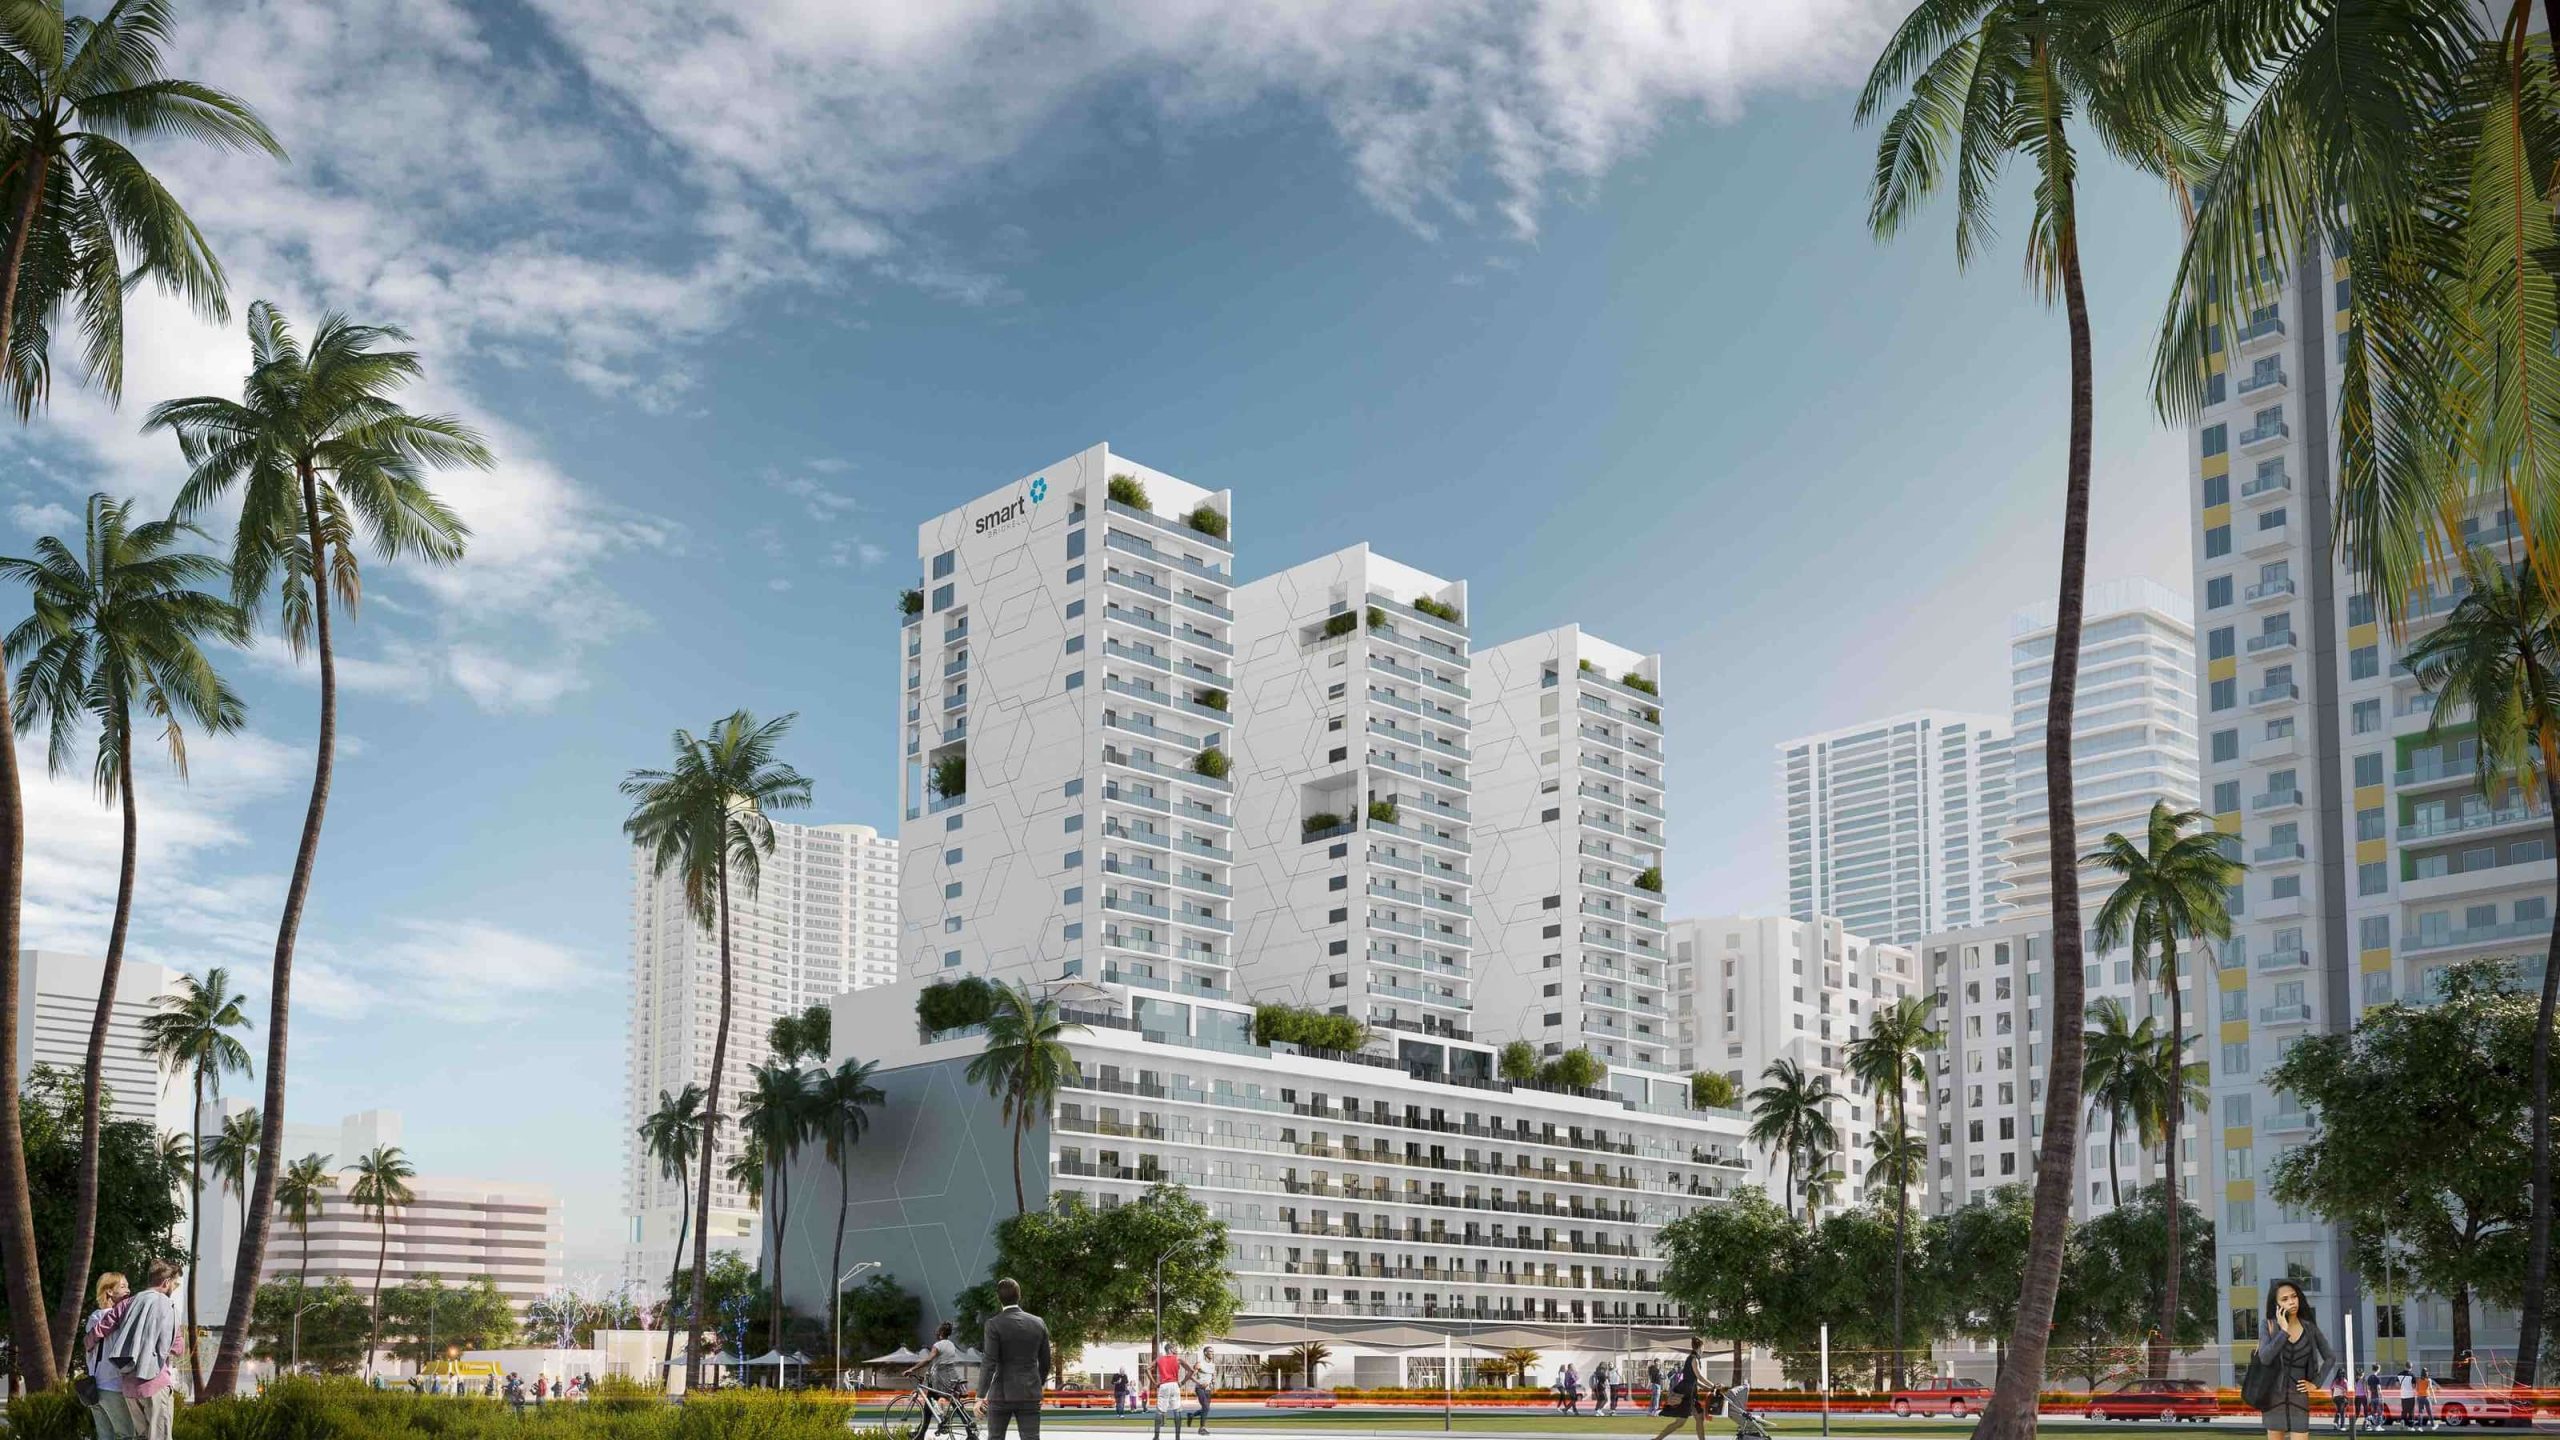 WITH FIRST TWO TOWERS SOLD OUT, THIRD TOWER AT SMART BRICKELL LAUNCHES